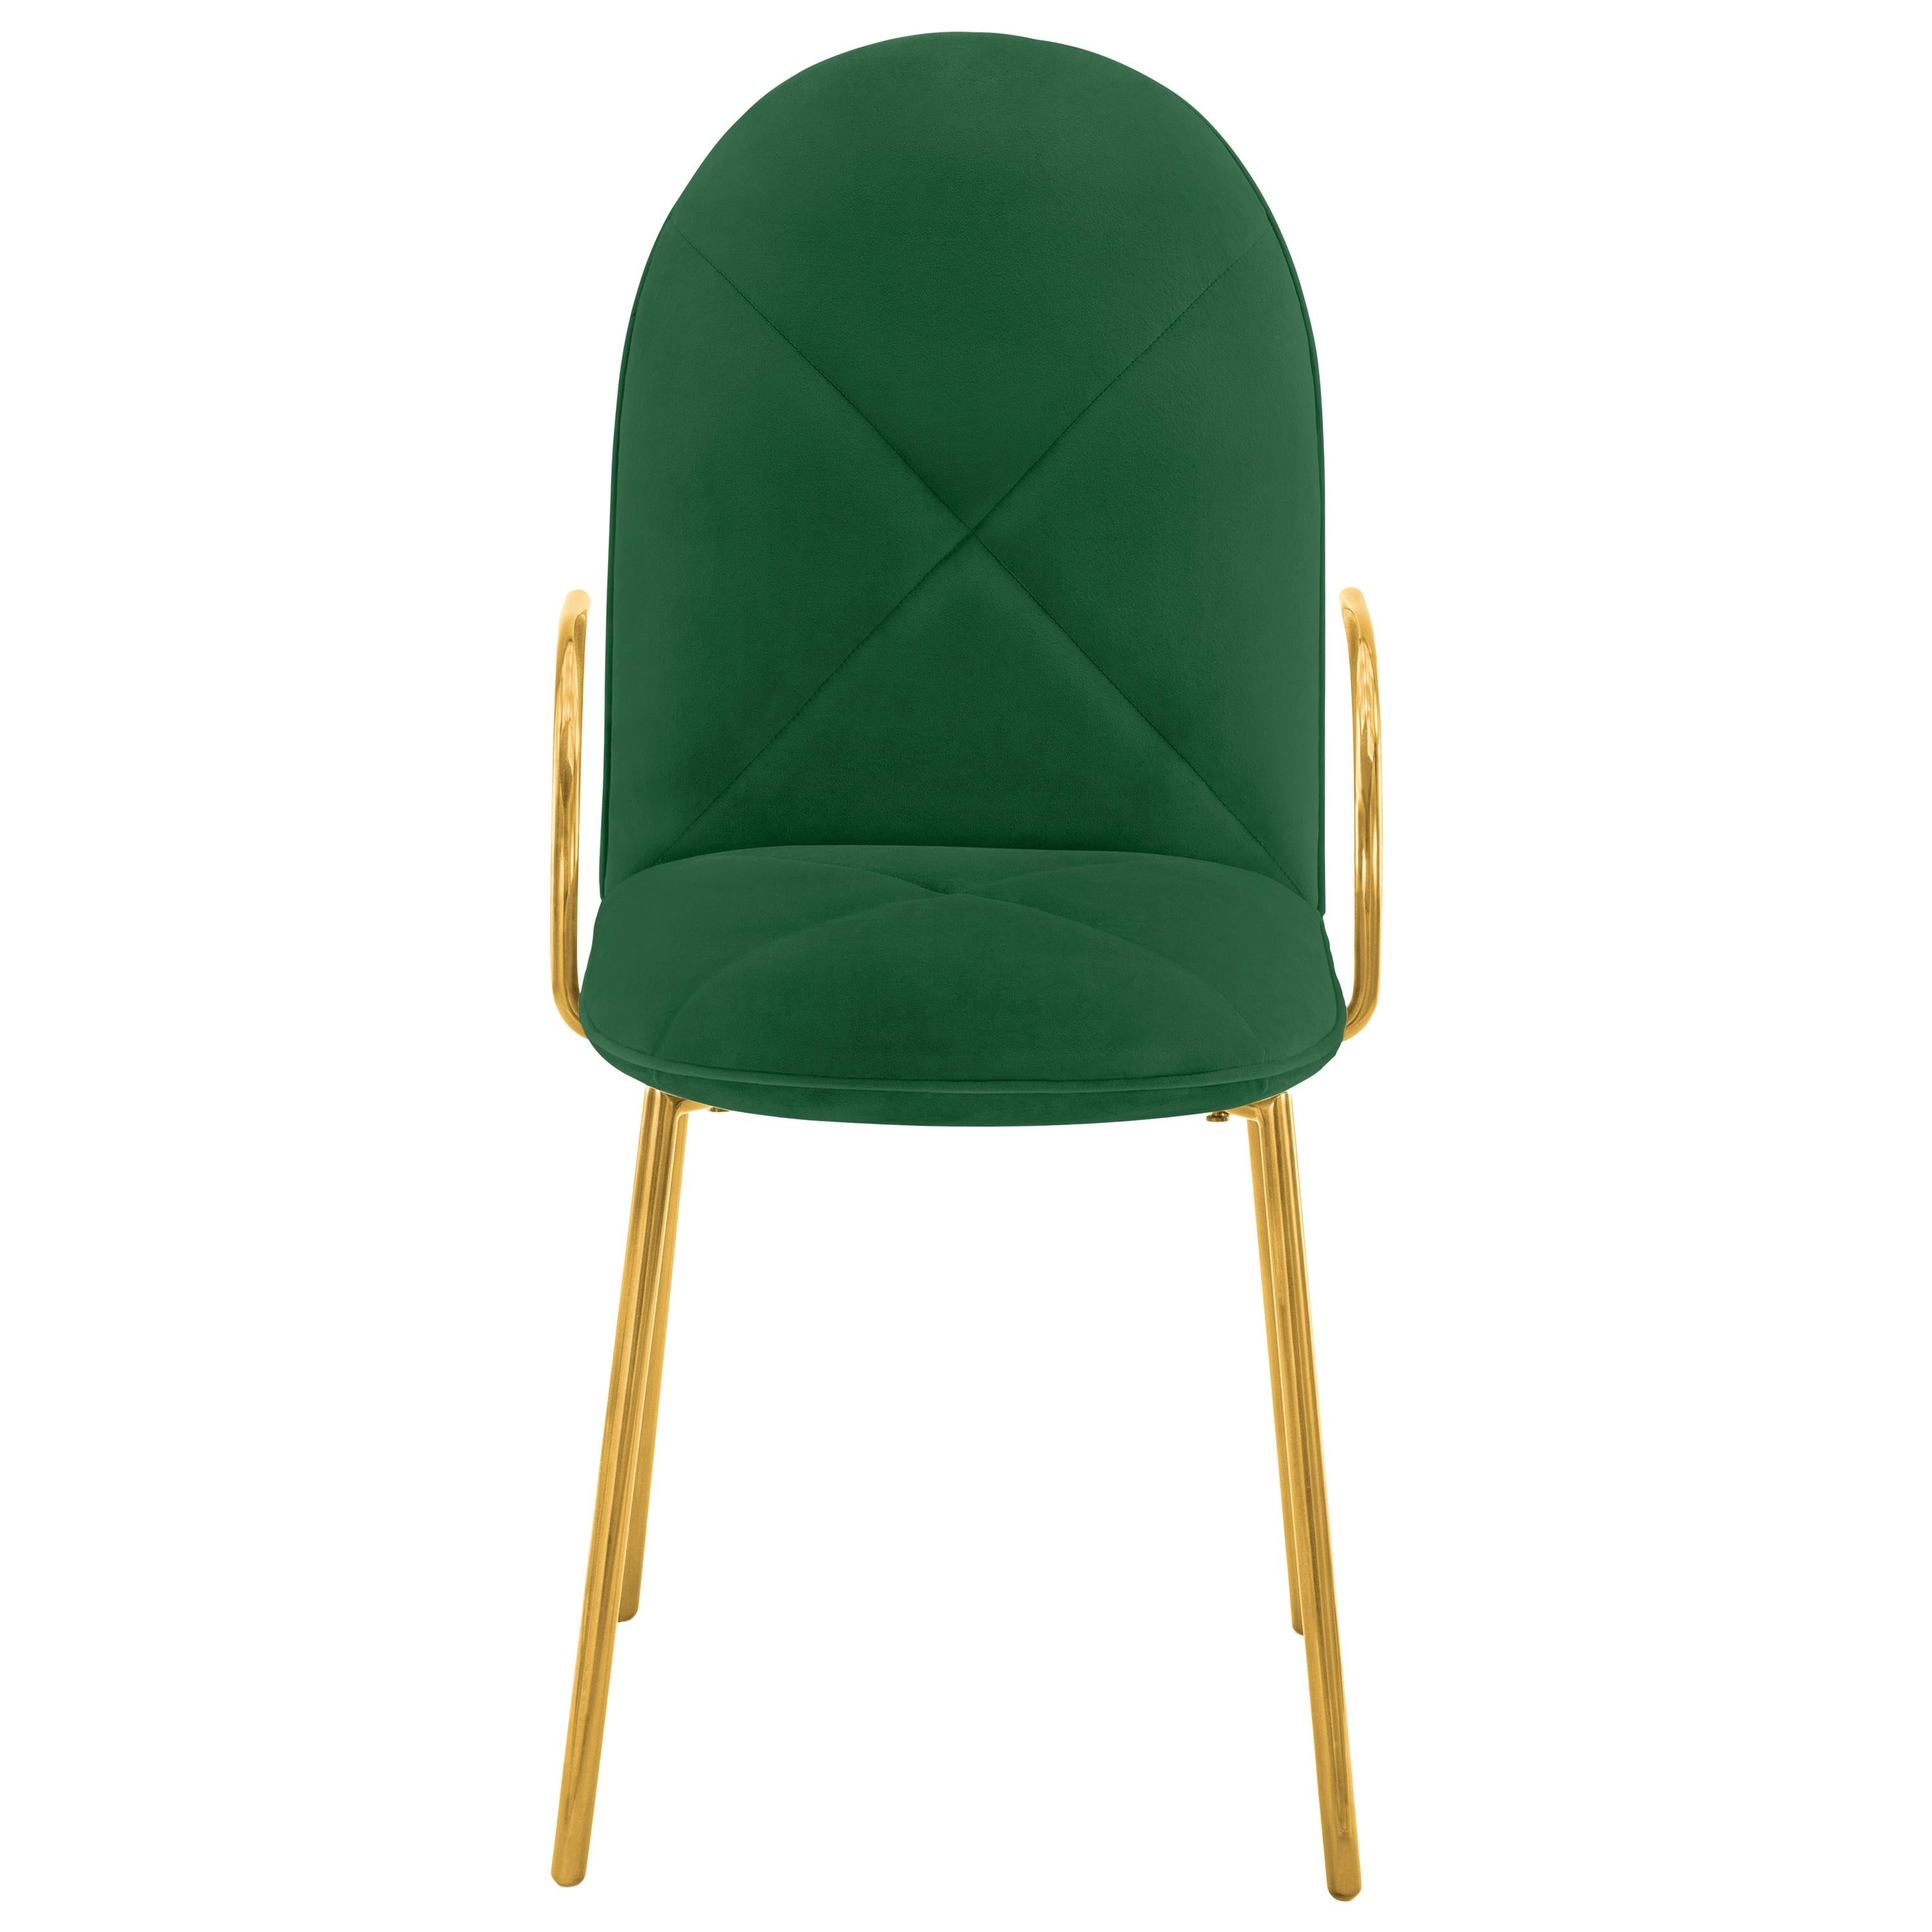 Orion Dining Chair with Plush Green Velvet and Gold Arms by Nika Zupanc For Sale